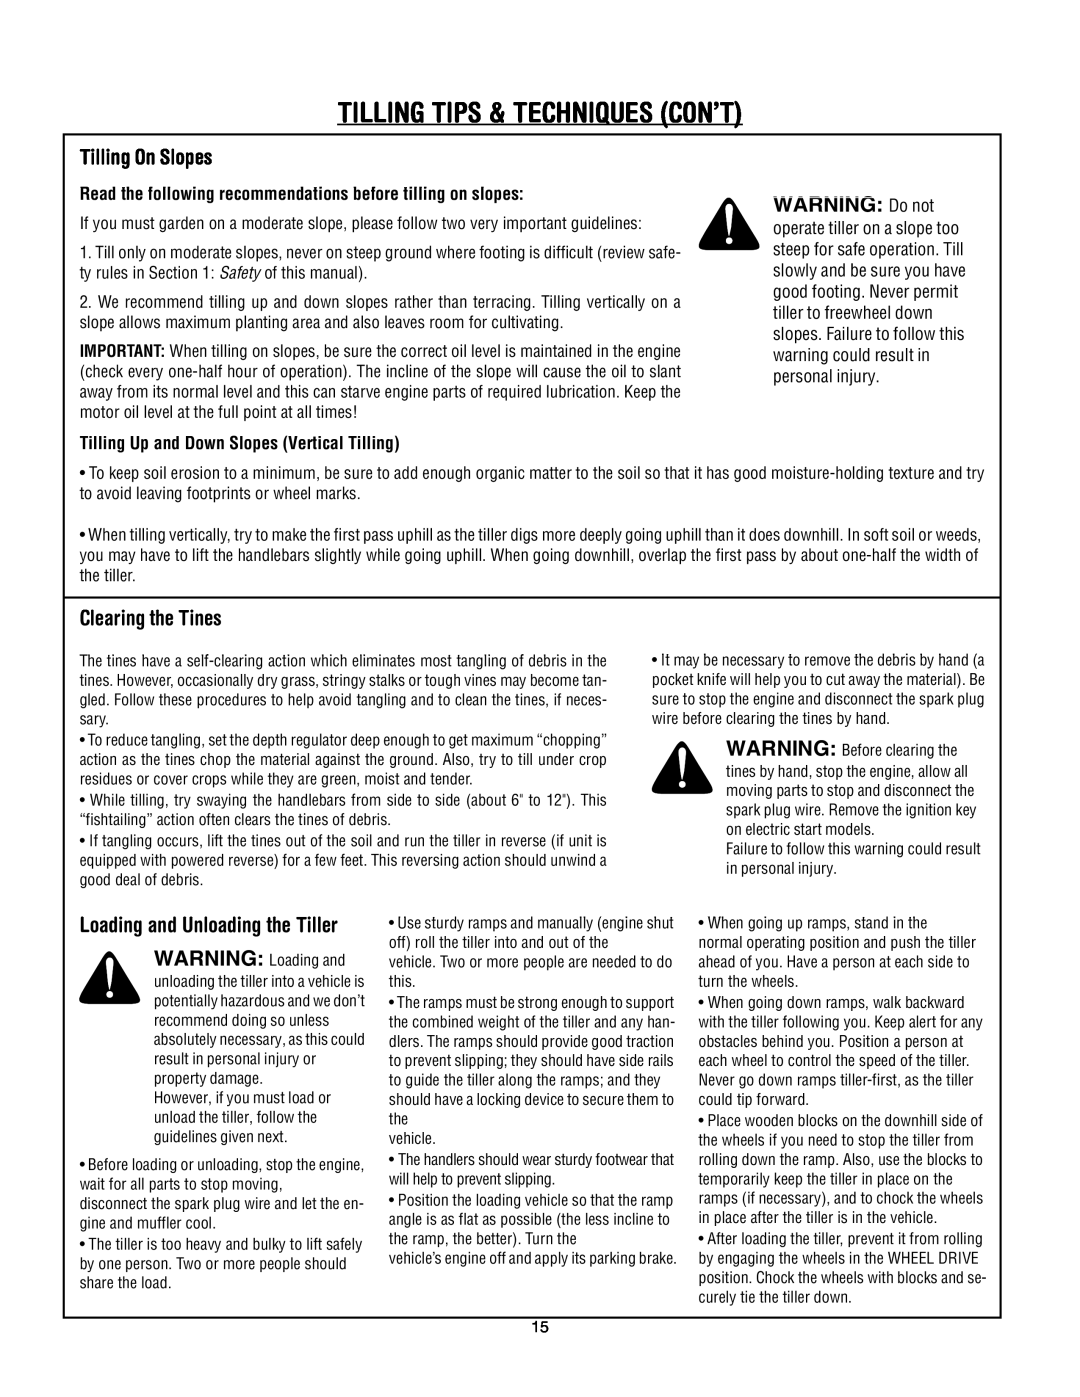 Troy-Bilt 640C-Tuffy manual Tilling Tips & Techniques Con’T, Tilling On Slopes, WARNING Do not, Clearing the Tines 